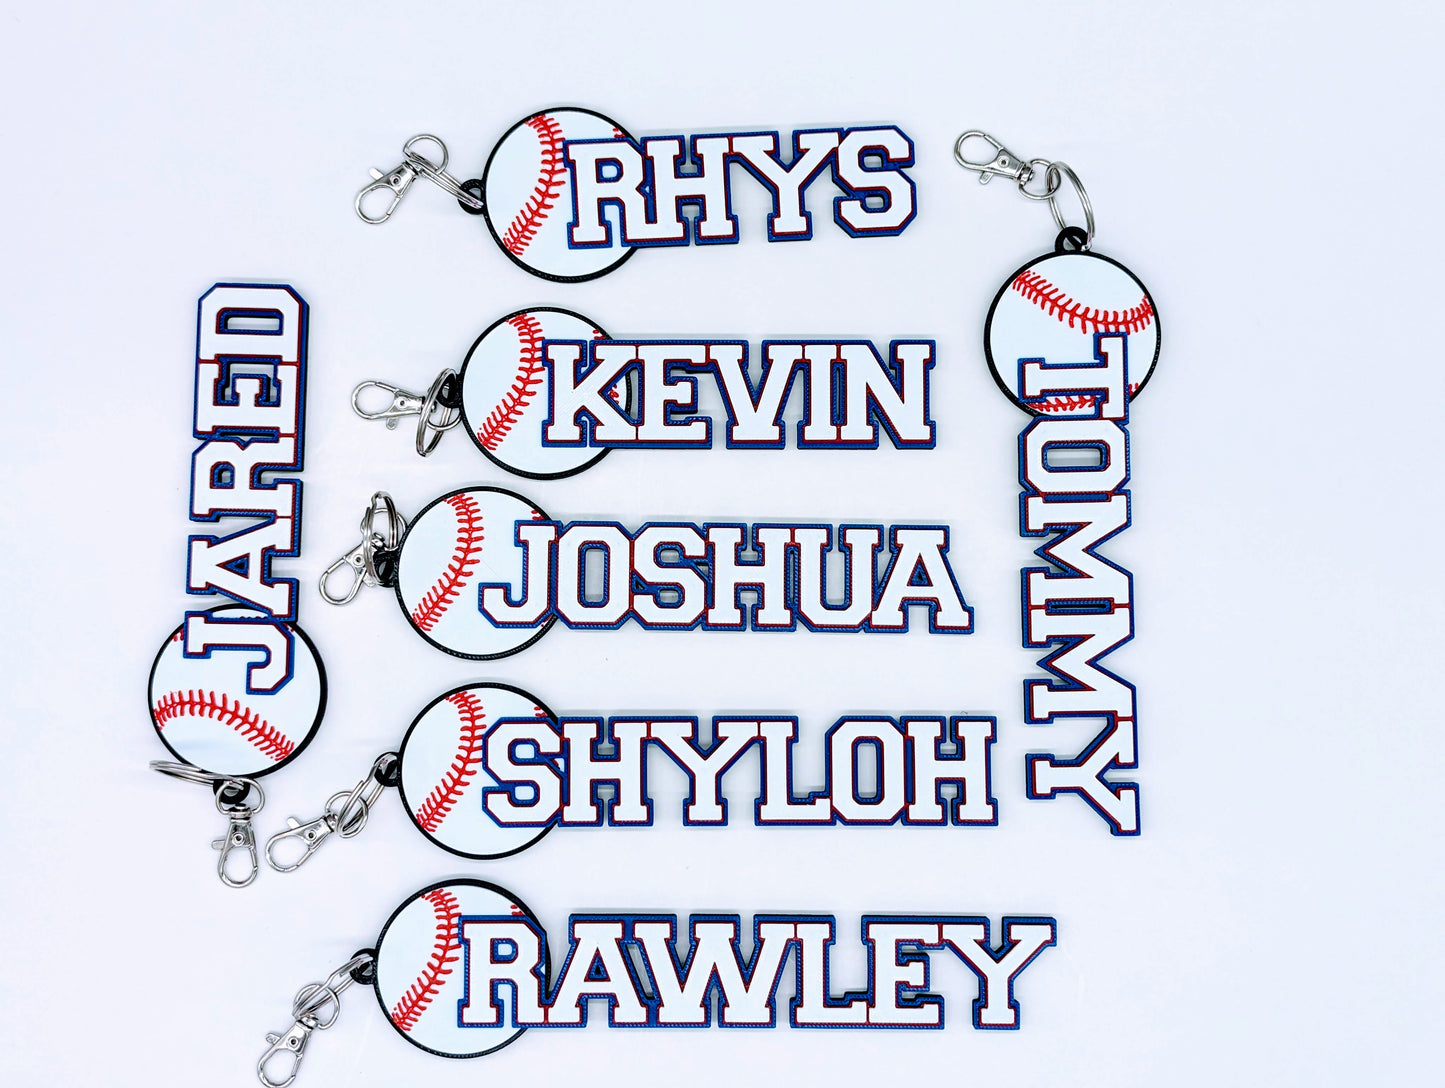 Team Bundle Baseball Bag Tags: Customized for unity, featuring team logo and each player's name/number. Ideal for showcasing team spirit and identity